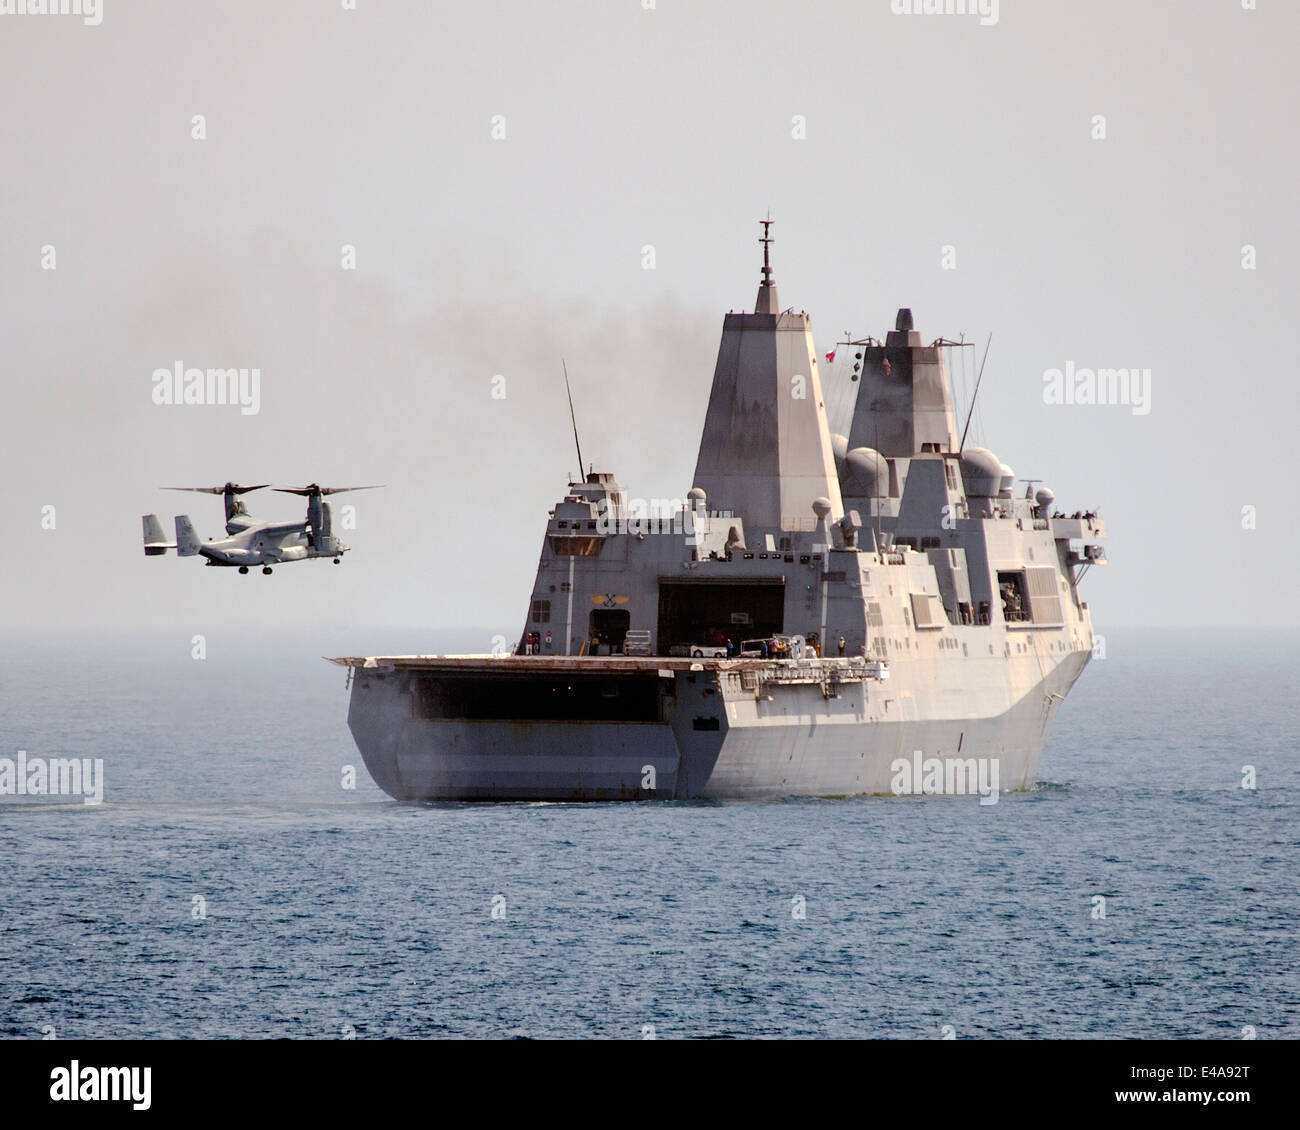 A US Marine Corps MV-22 Osprey aircraft approaches the San Antonio-class amphibious transport dock USS Mesa Verde to land July 02, 2014 in the Persian Gulf. Stock Photo